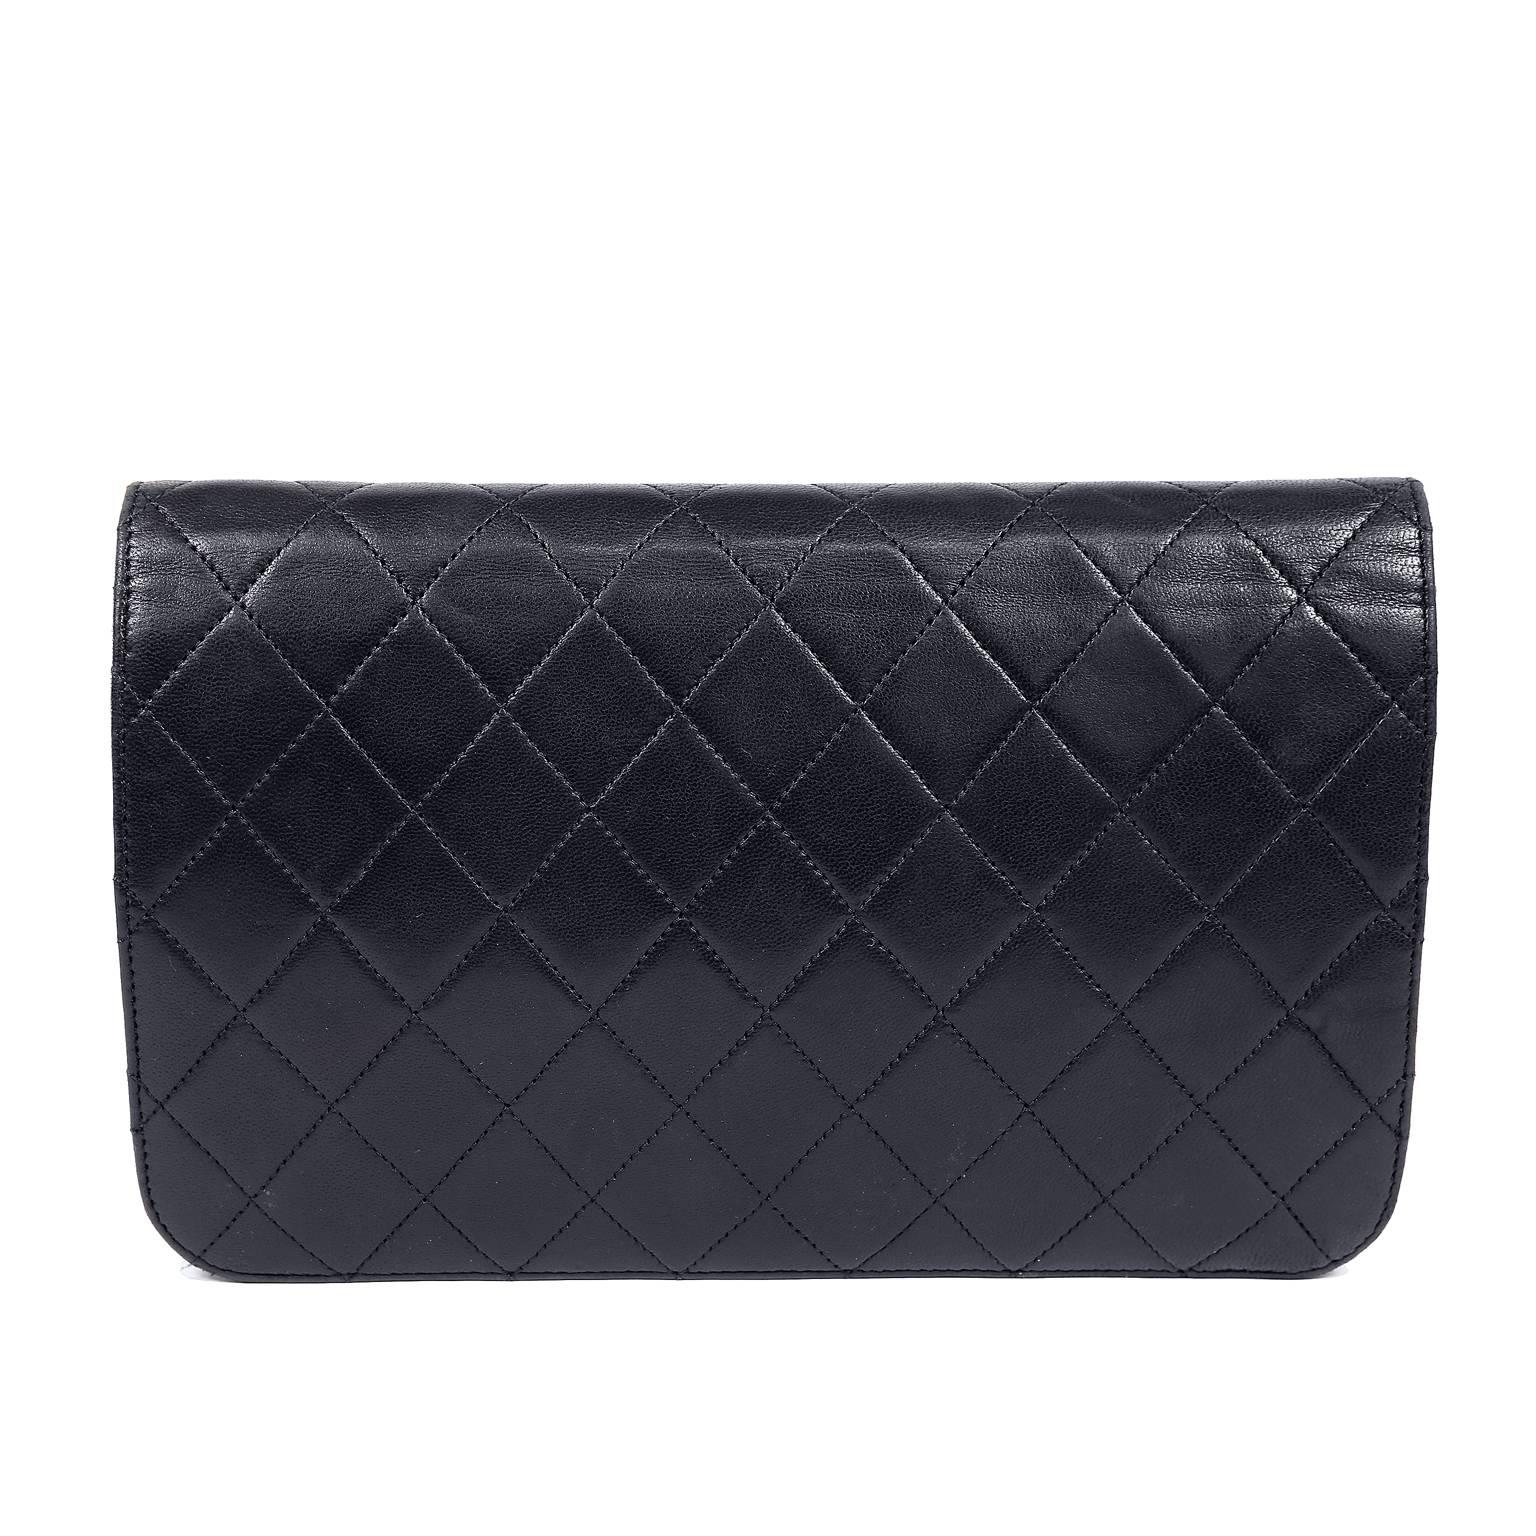 Chanel Navy Leather Vintage Clutch- MINT
Beautiful deep navy blue leather is quilted in signature Chanel diamond pattern.  Gold interlocking CC conceals a snap closure.  Burgundy leather interior.  Optional single leather and chain entwined strap